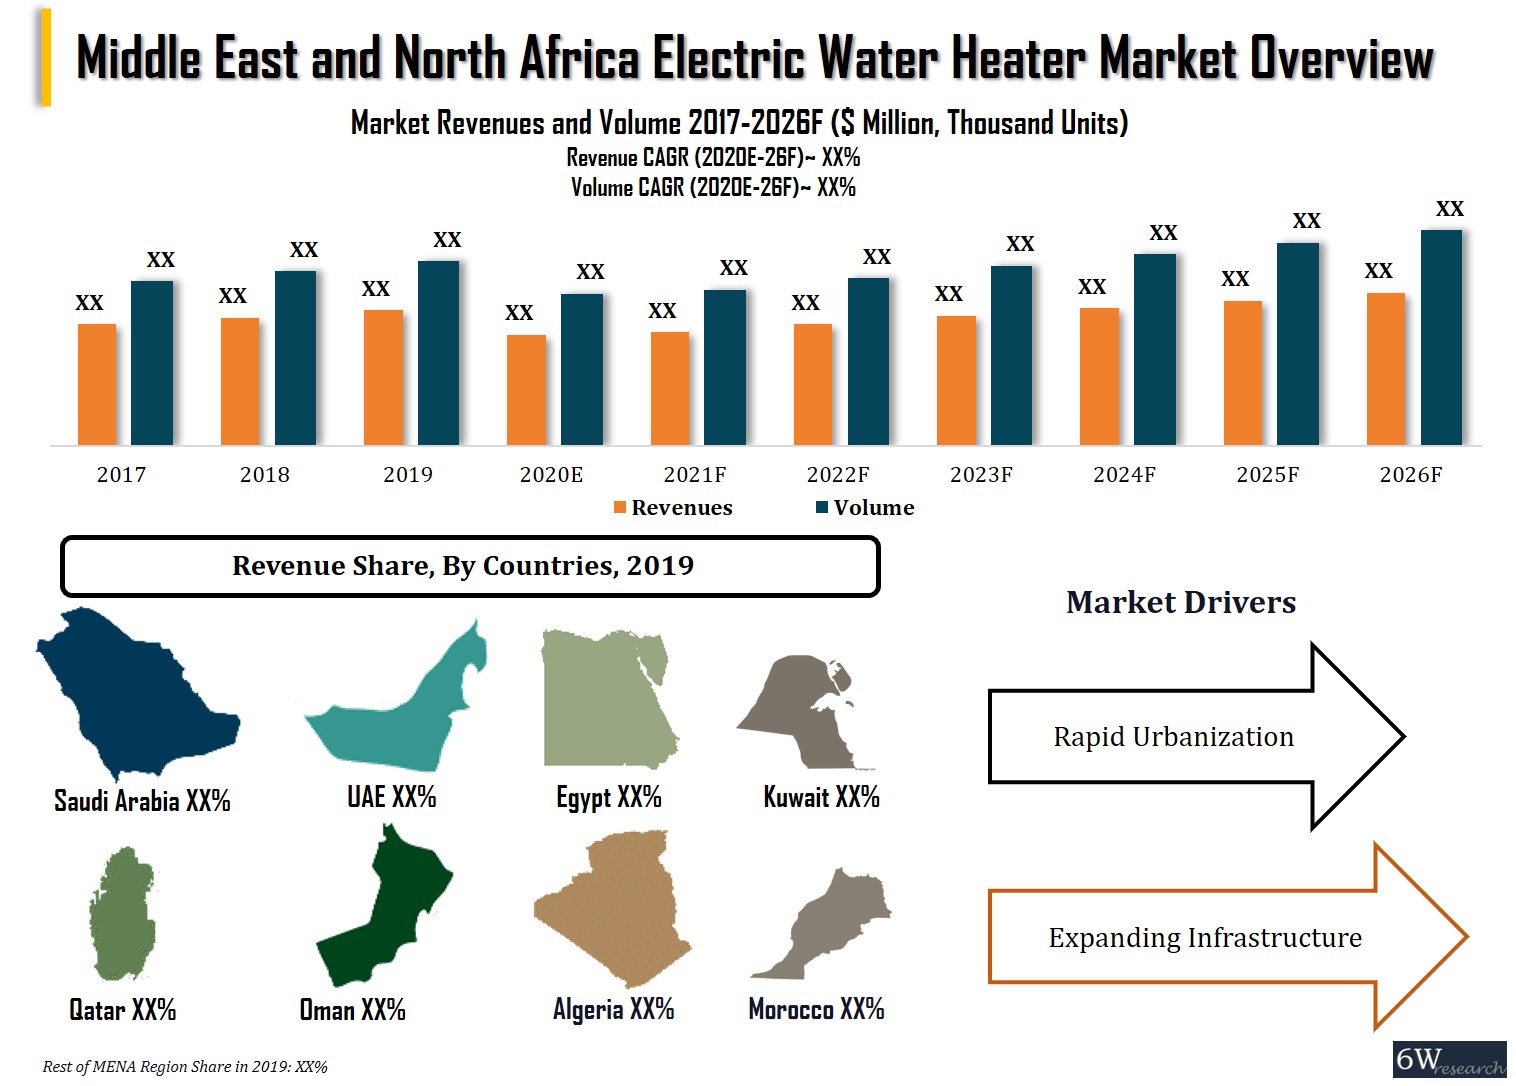 Middle East and North Africa (MENA) Electric Water Heater Market